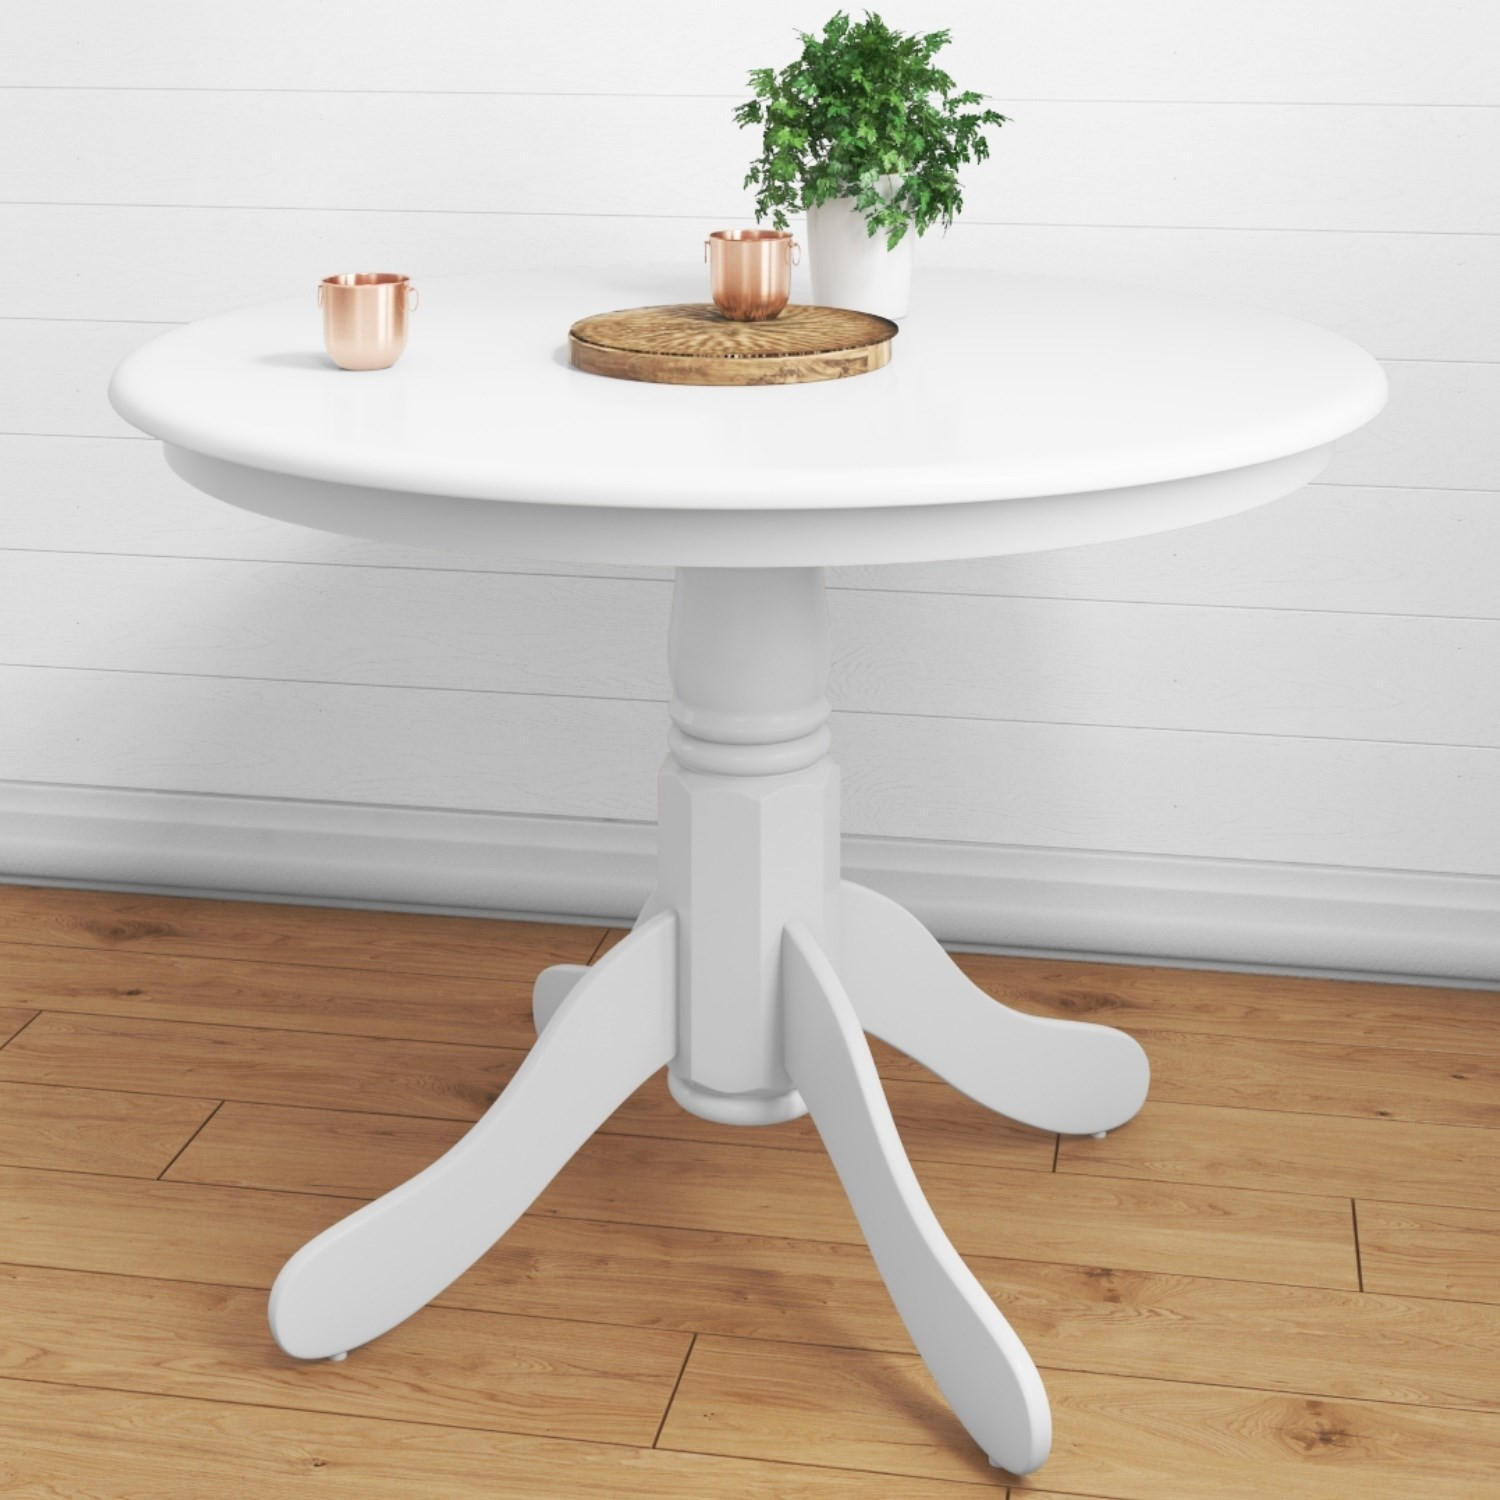 Small White Kitchen Tables
 Rhode Island Small Round Dining Table in White Seats 4